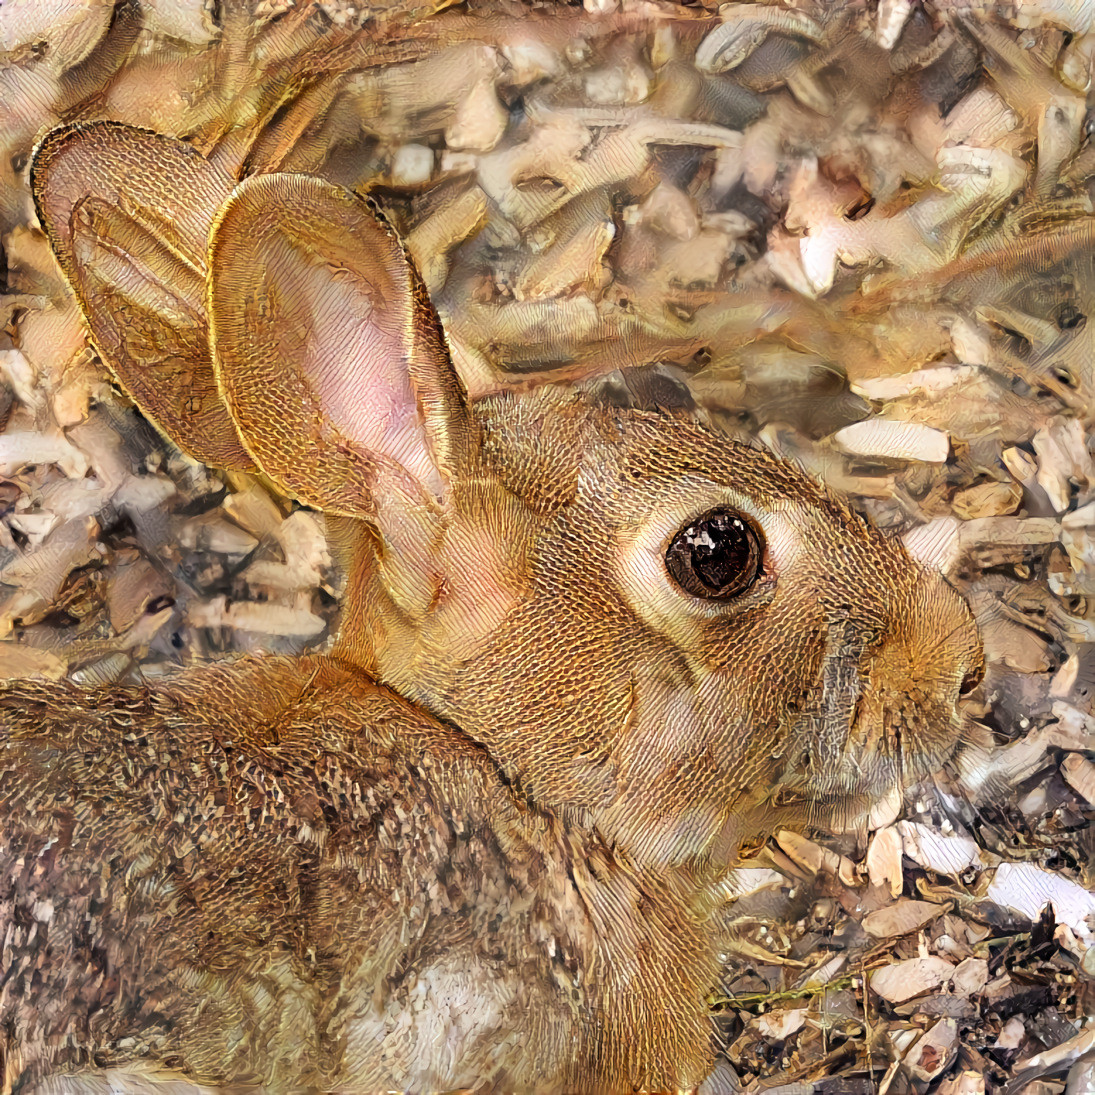 This eastern cottontail (Sylvilagus floridanus) visits us from time to time. Even poses for my camera. Style by me.